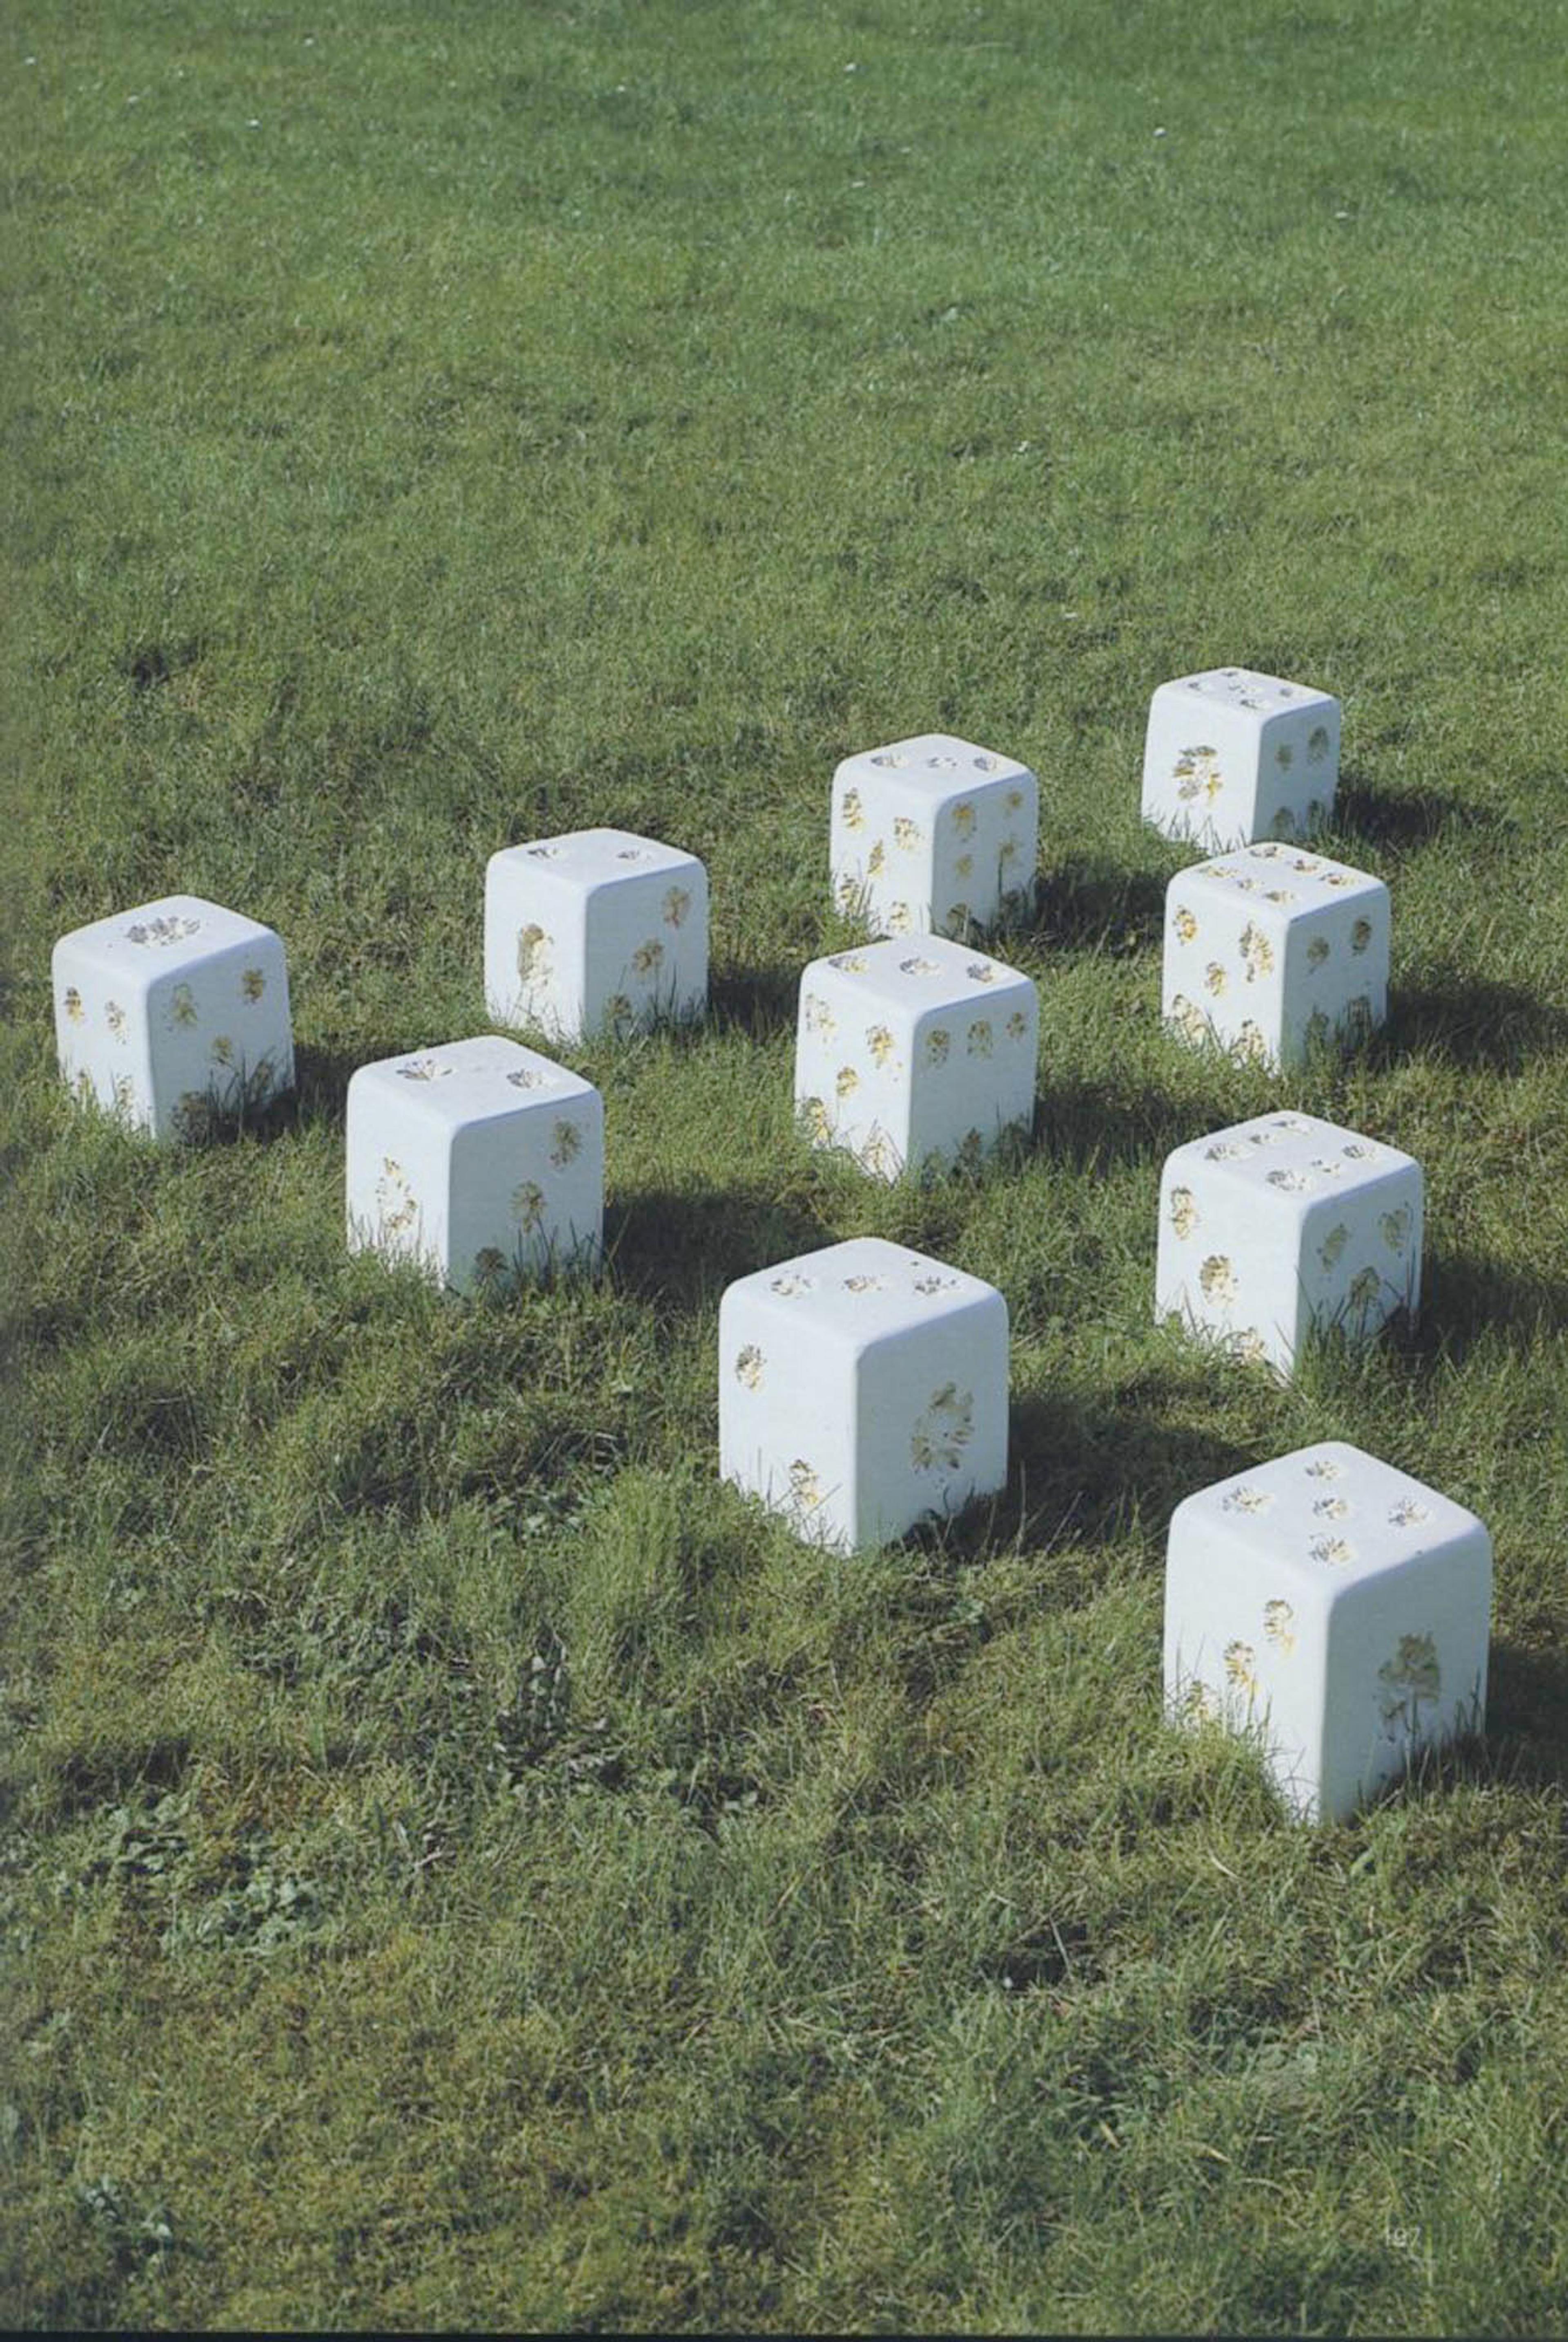 (2003) Beatrice Stewart, GM Space Invaders, 2002, mixed media and plaster, 10 pieces, each 18 x 18 x 18 cm.